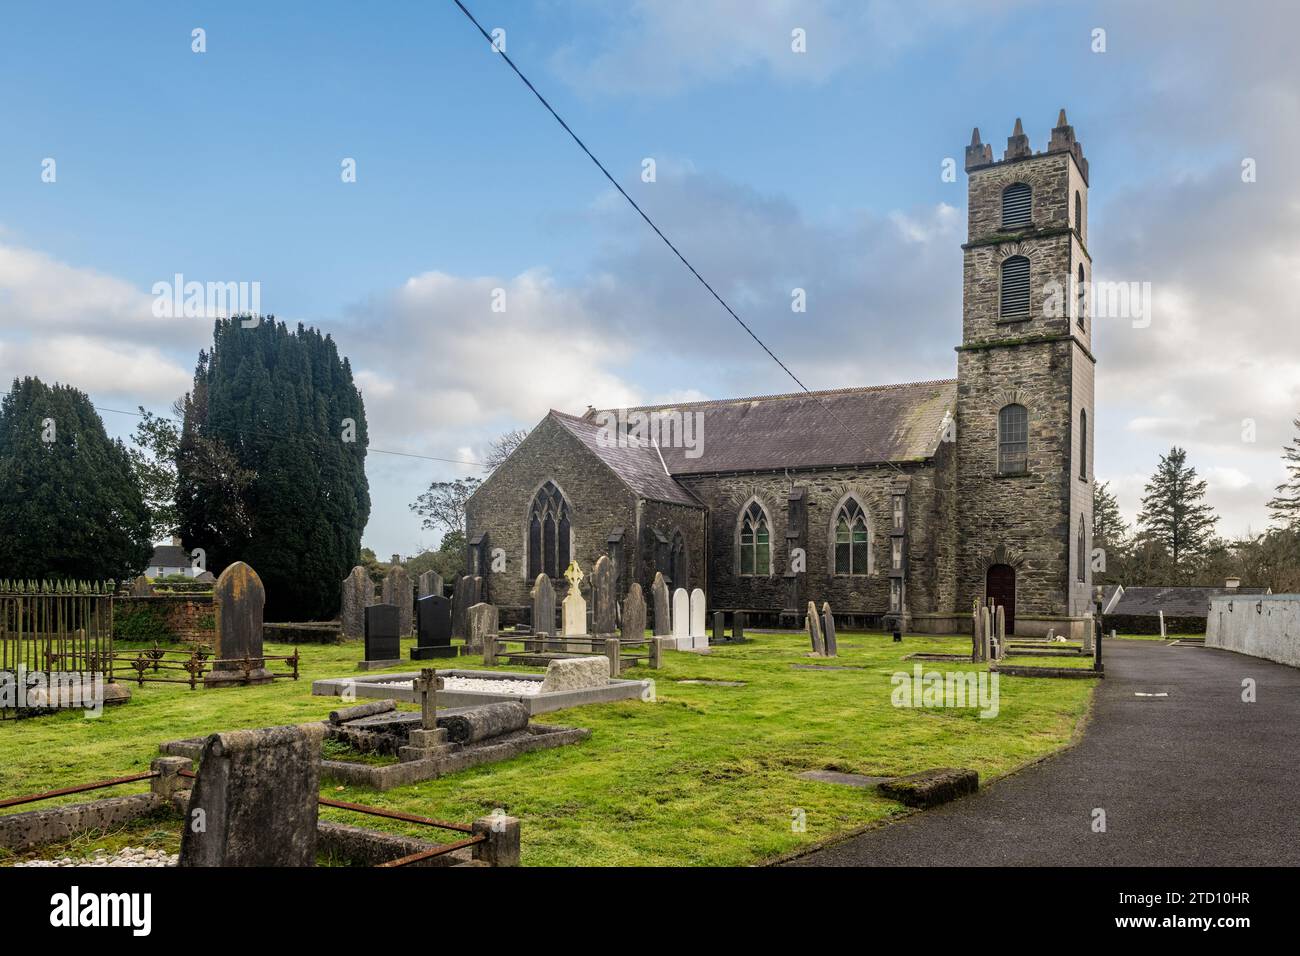 St. Mary's Church, Church of Ireland, Dunmanway, West Cork, Irlande. Banque D'Images